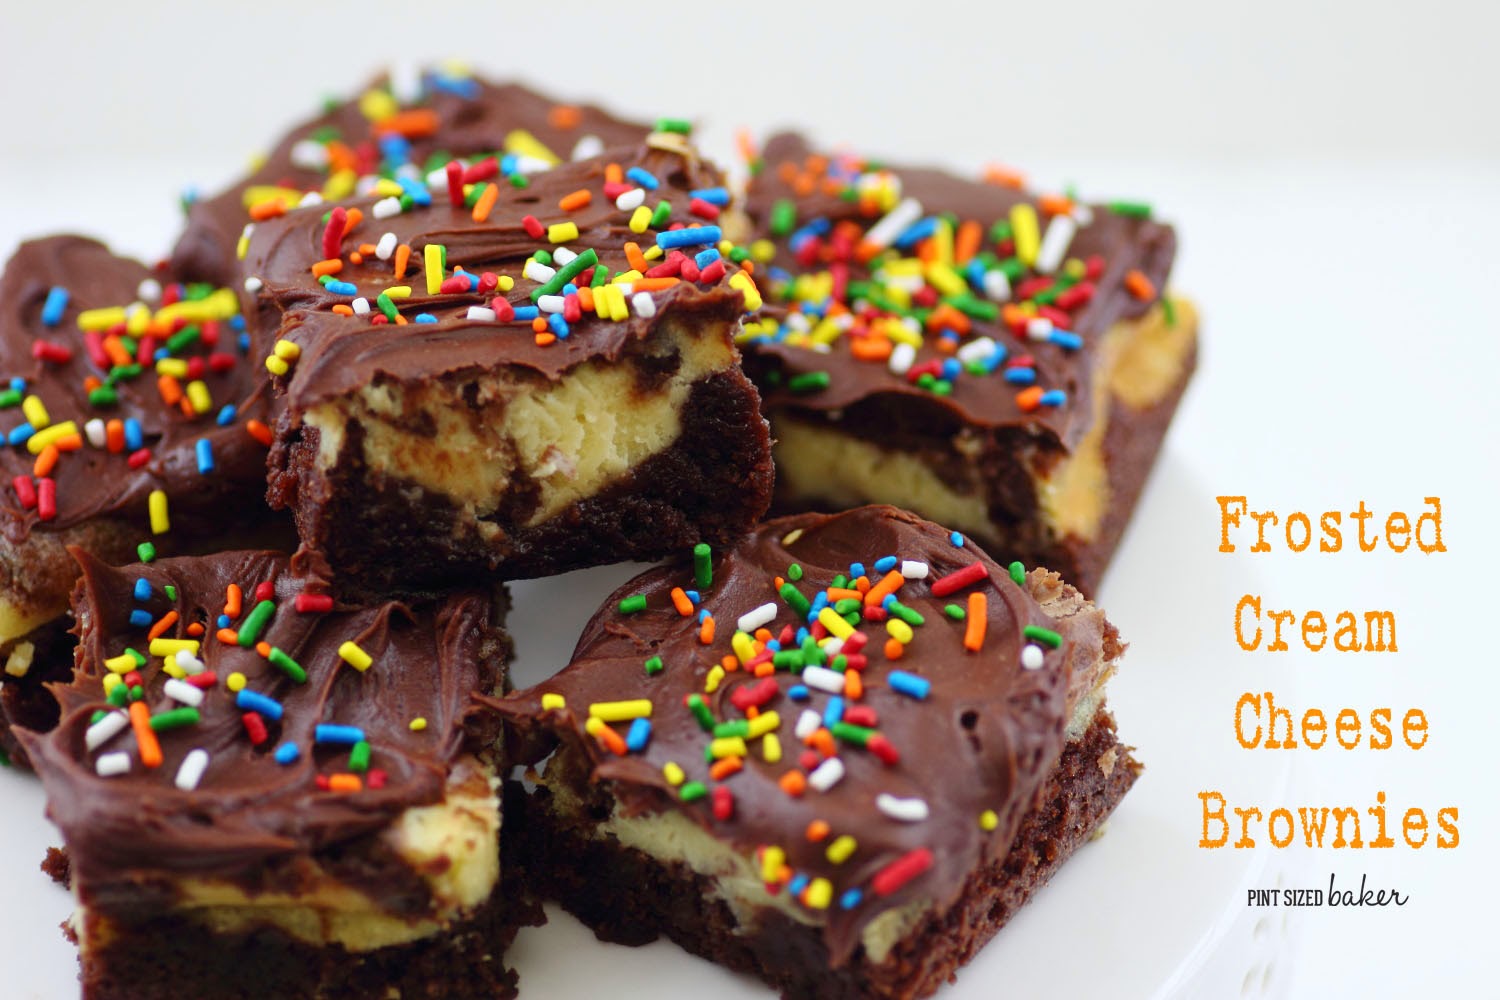 This is my go-to one pot brownie recipe. These Frosted Cream Cheese Swirl Brownies are just what the end of a busy work day calls for!